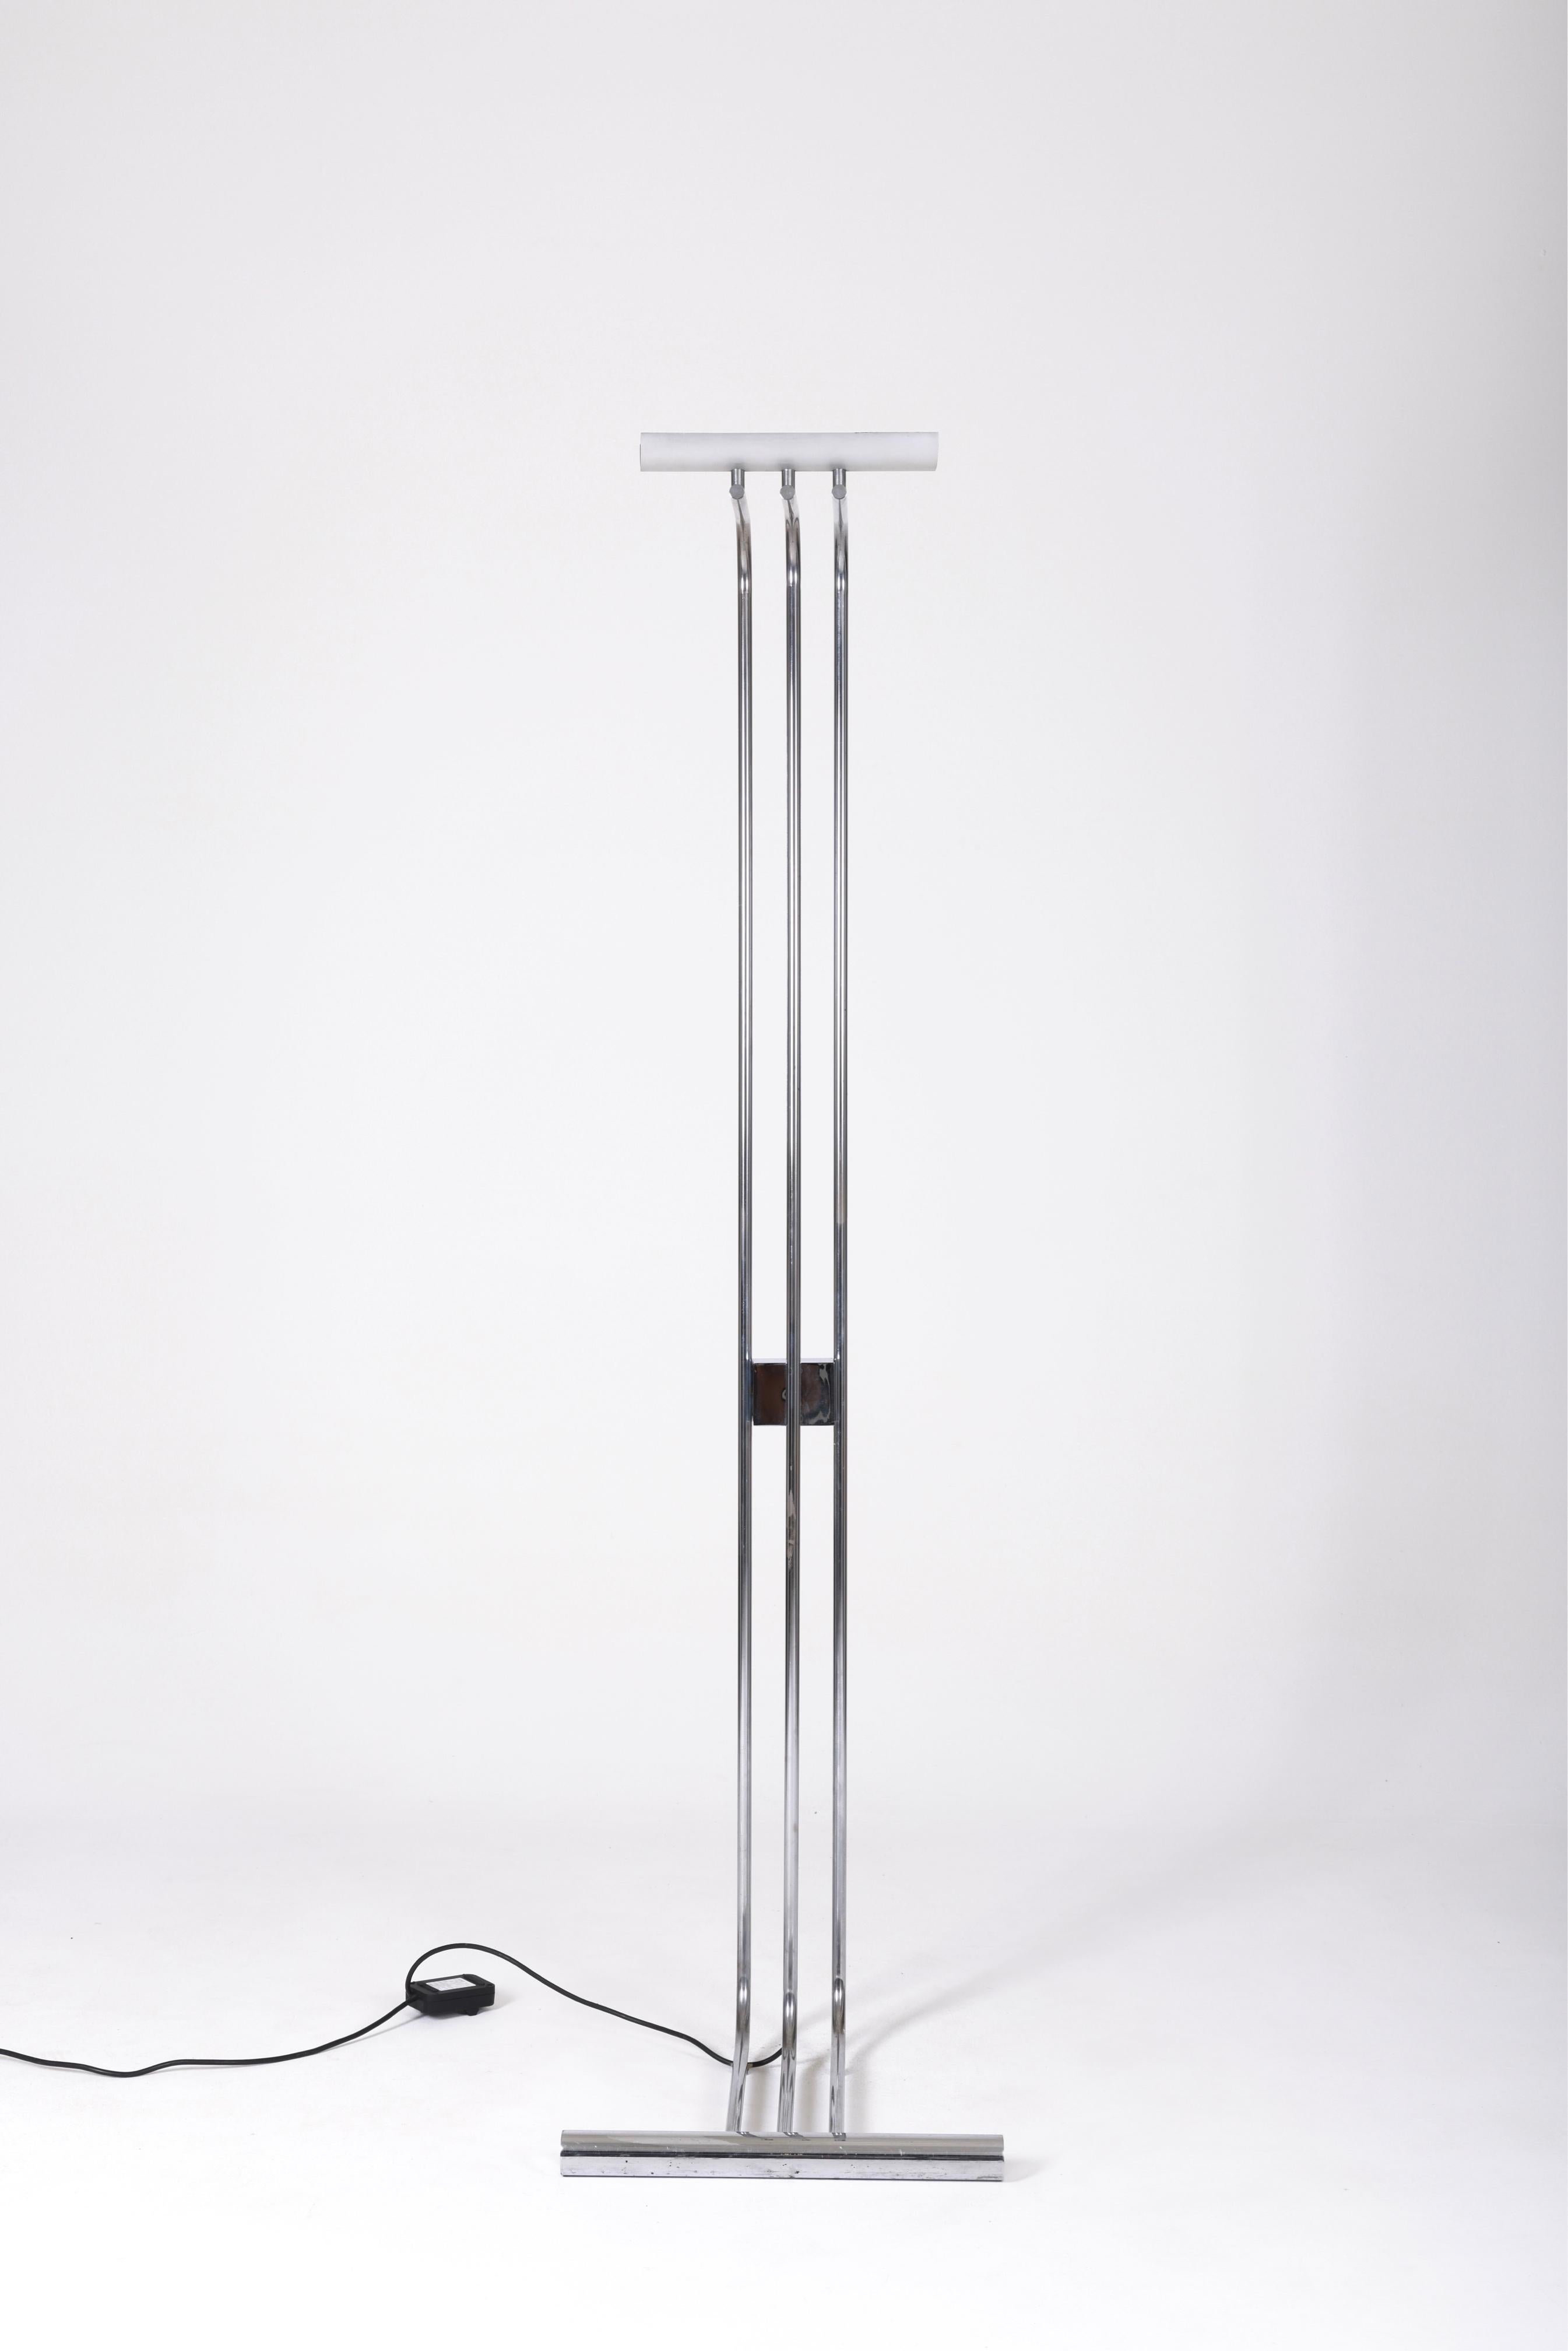 Floor lamp 10507 published by Verre Lumière in the 1970s. Functional and in beautiful condition.
LP1113